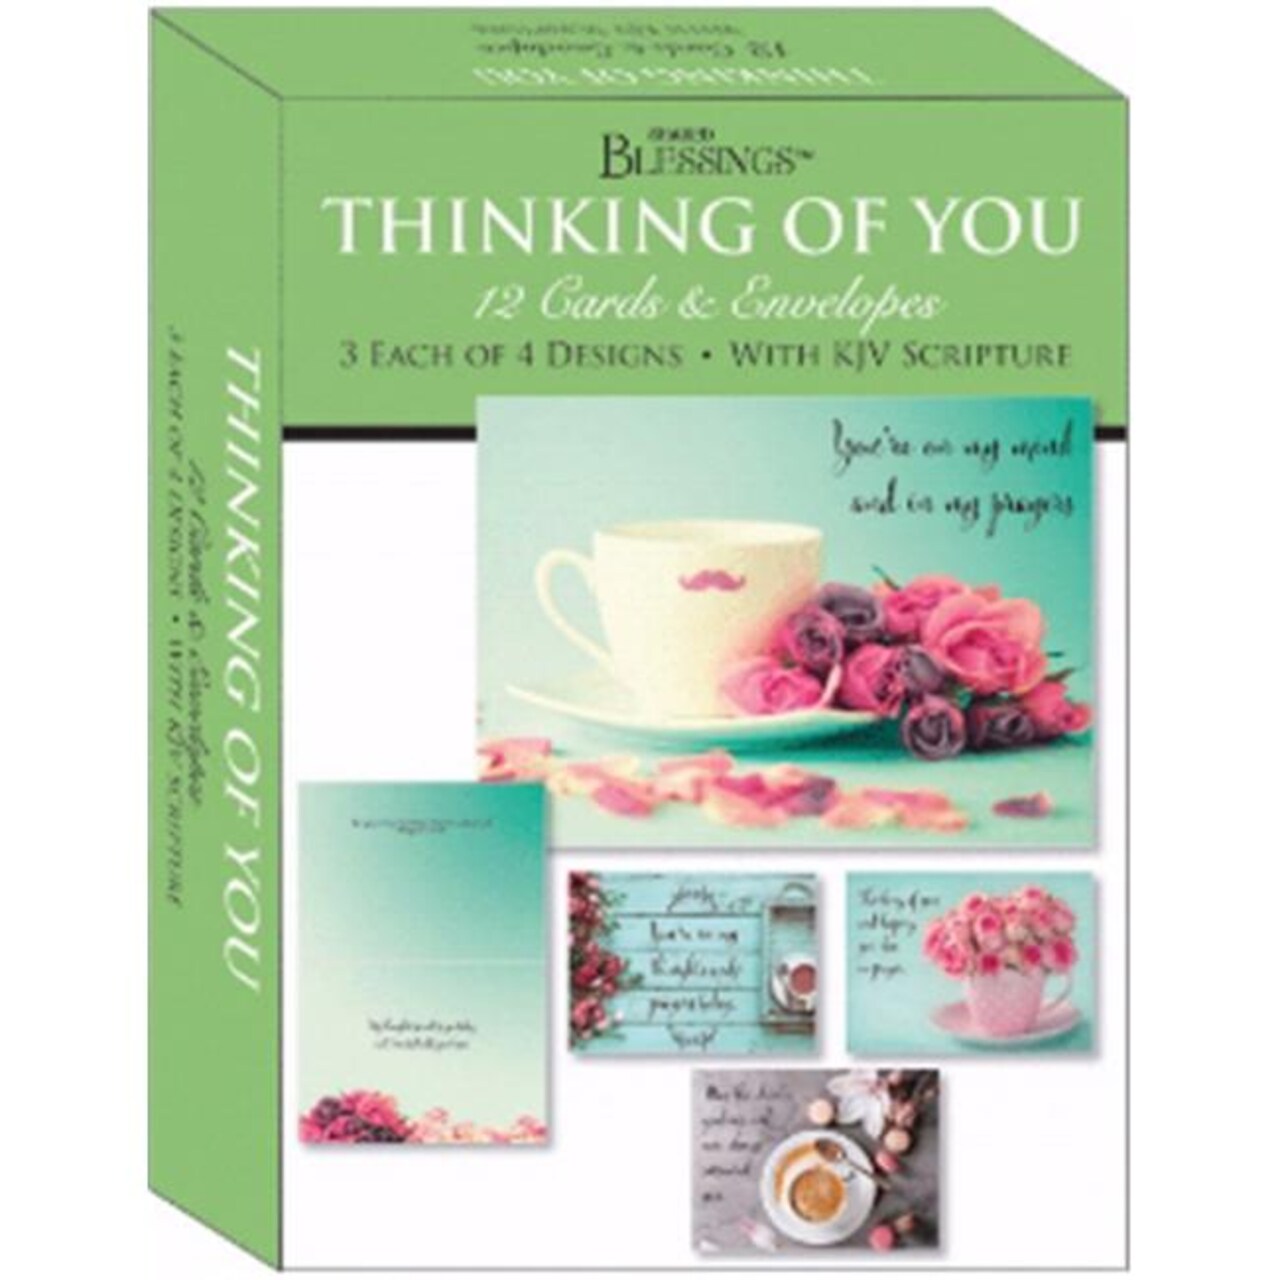 Crown Point Graphics 164487 Shared Blessings-Thinking of You Gentle Thoughts Boxed Card - Box of 12